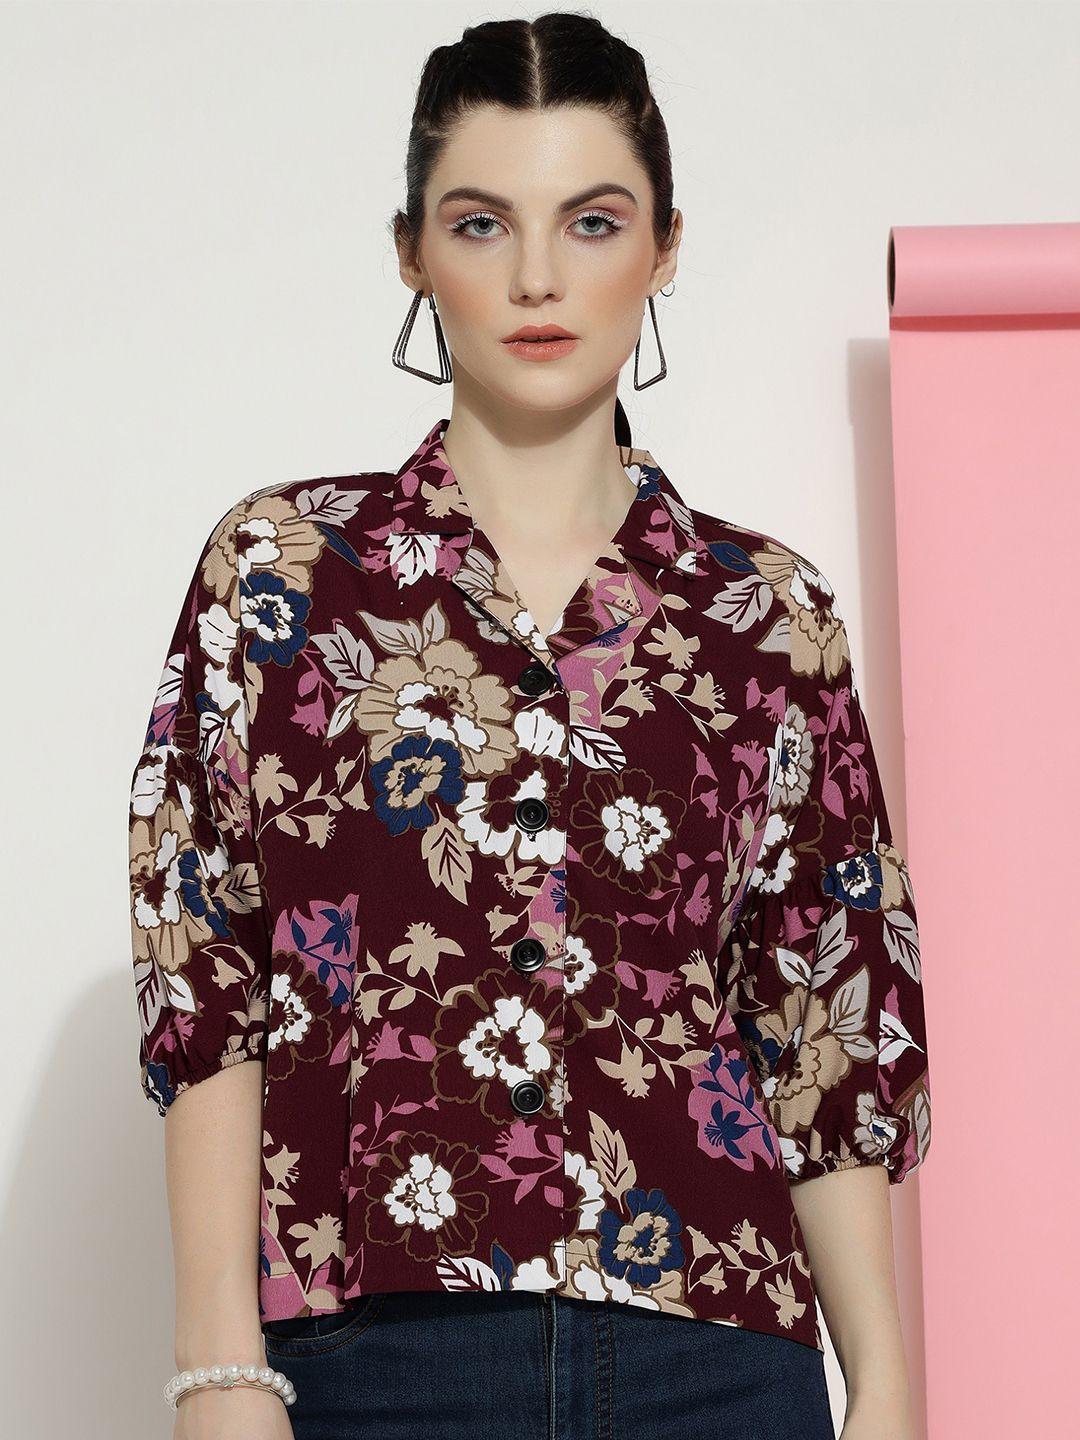 dressberry maroon floral printed crepe shirt style top